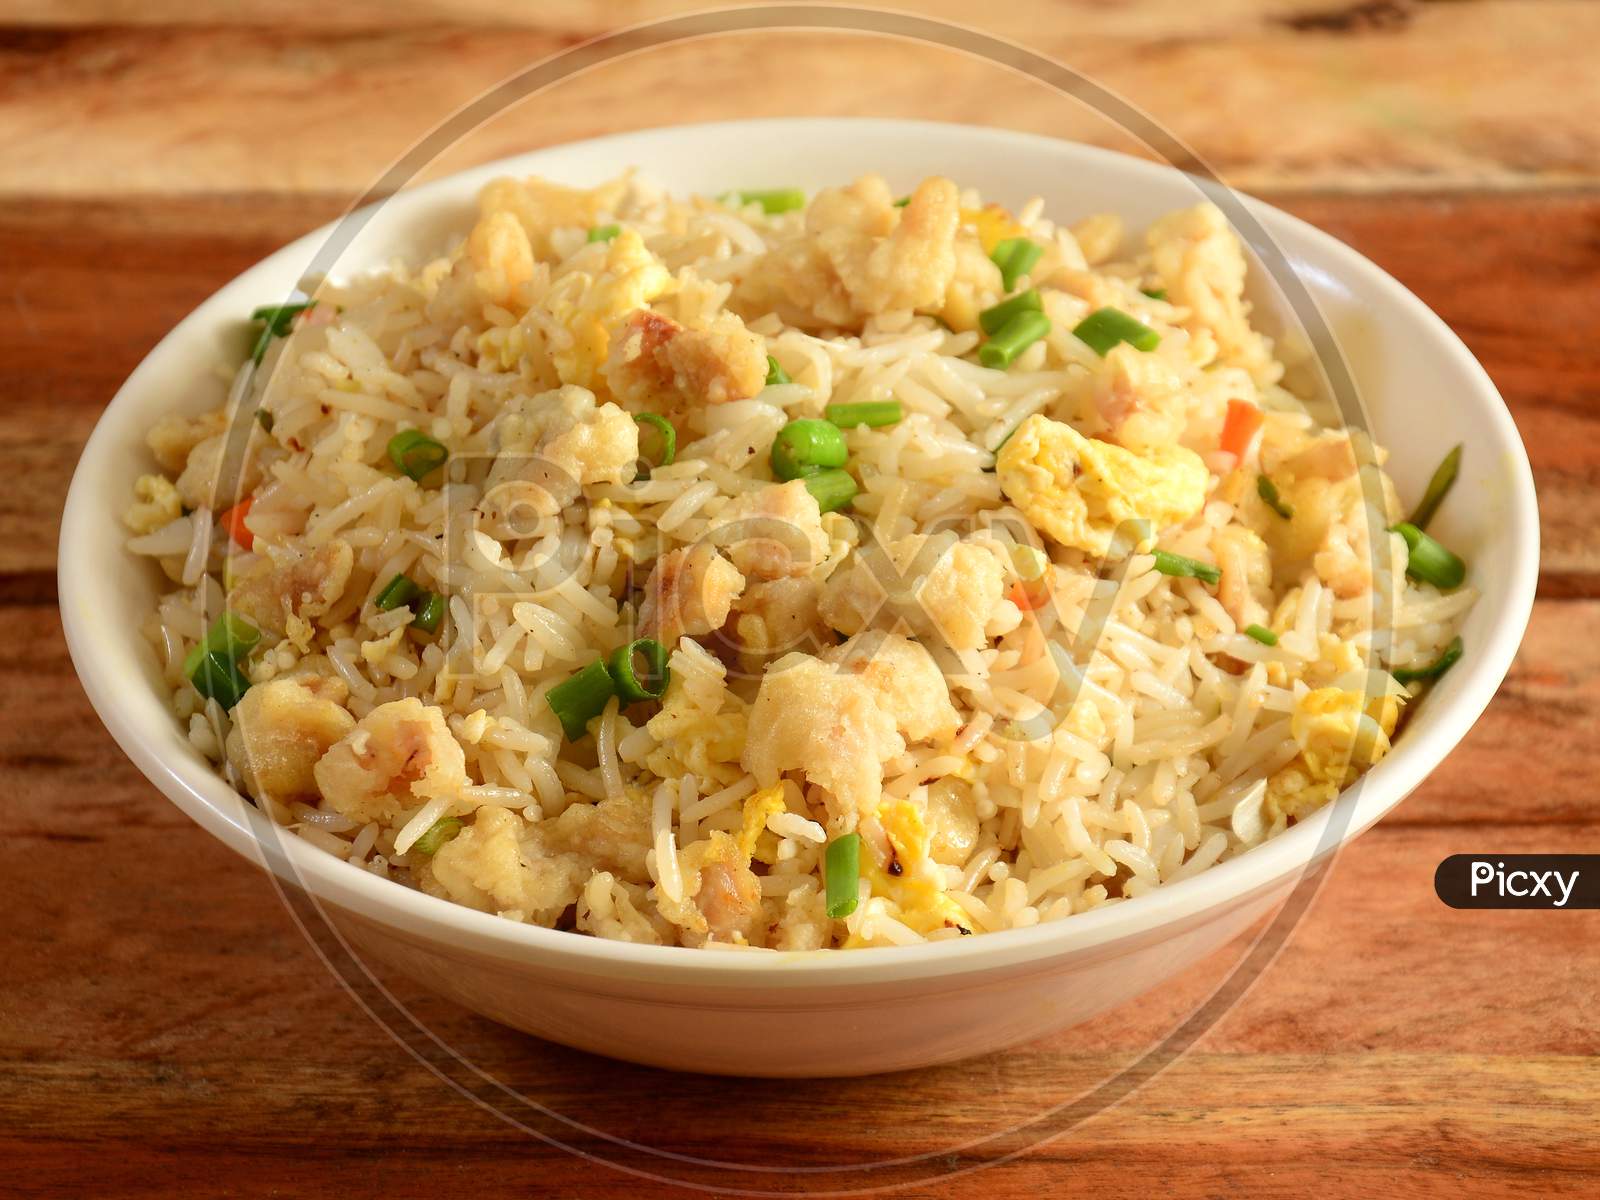 Indian Cuisine Healthy And Tasty Chicken Fried Rice Served In White Bowl Over A Rustic Wooden Background, Selective Focus